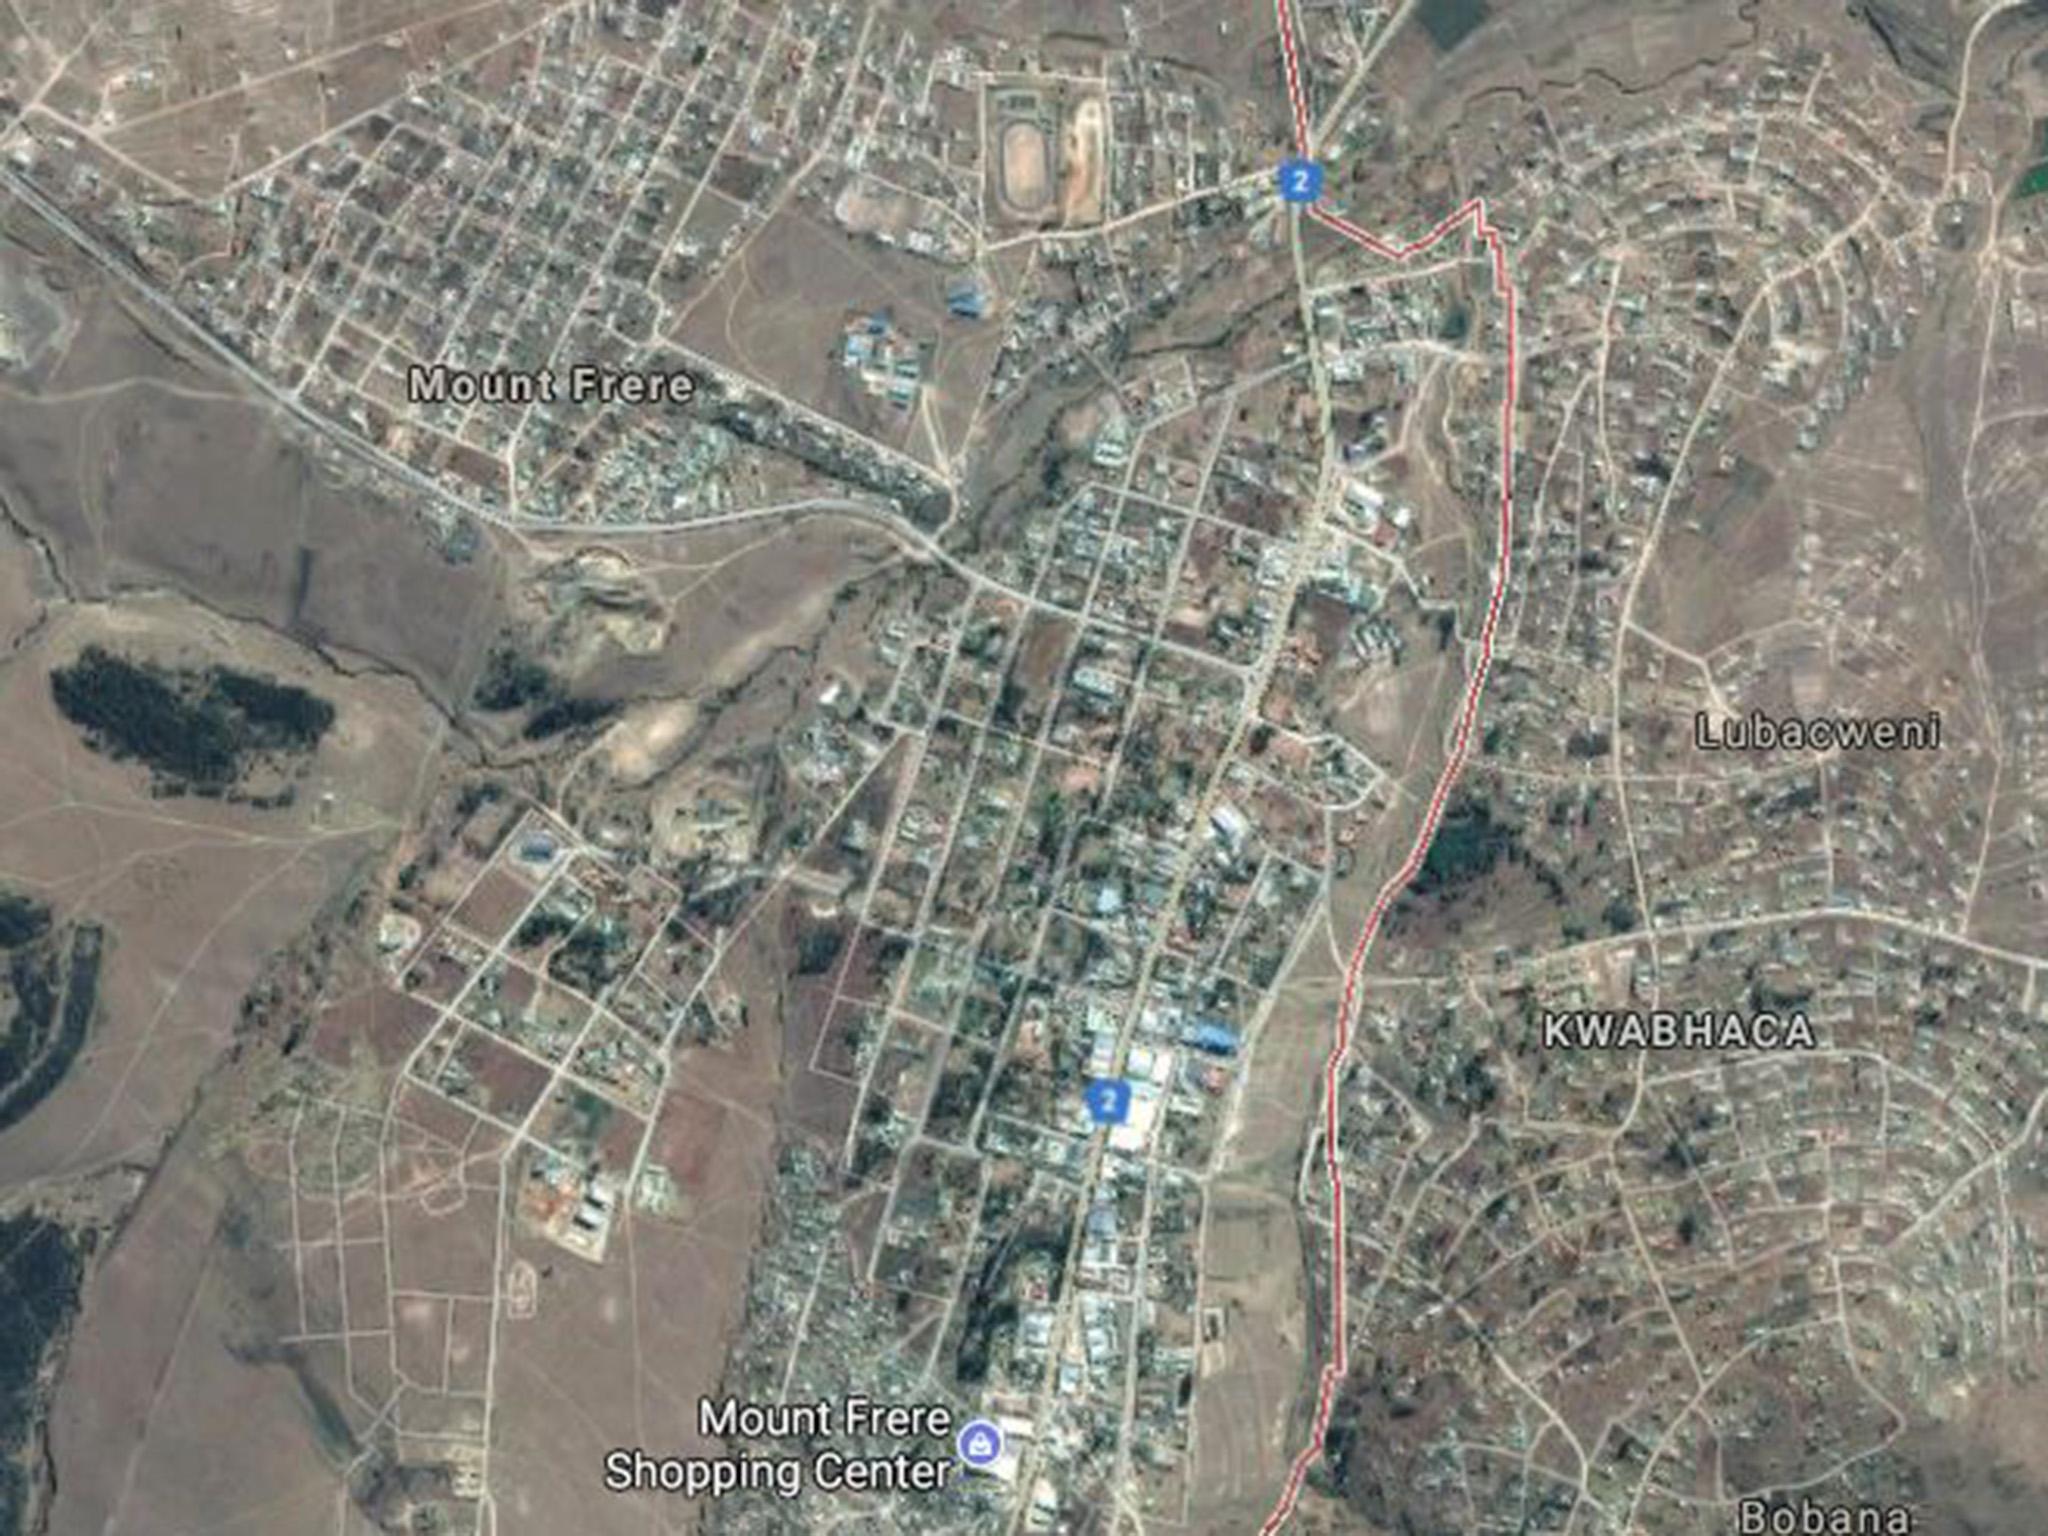 The incident happened in the small town of Mount Frere in South Africa